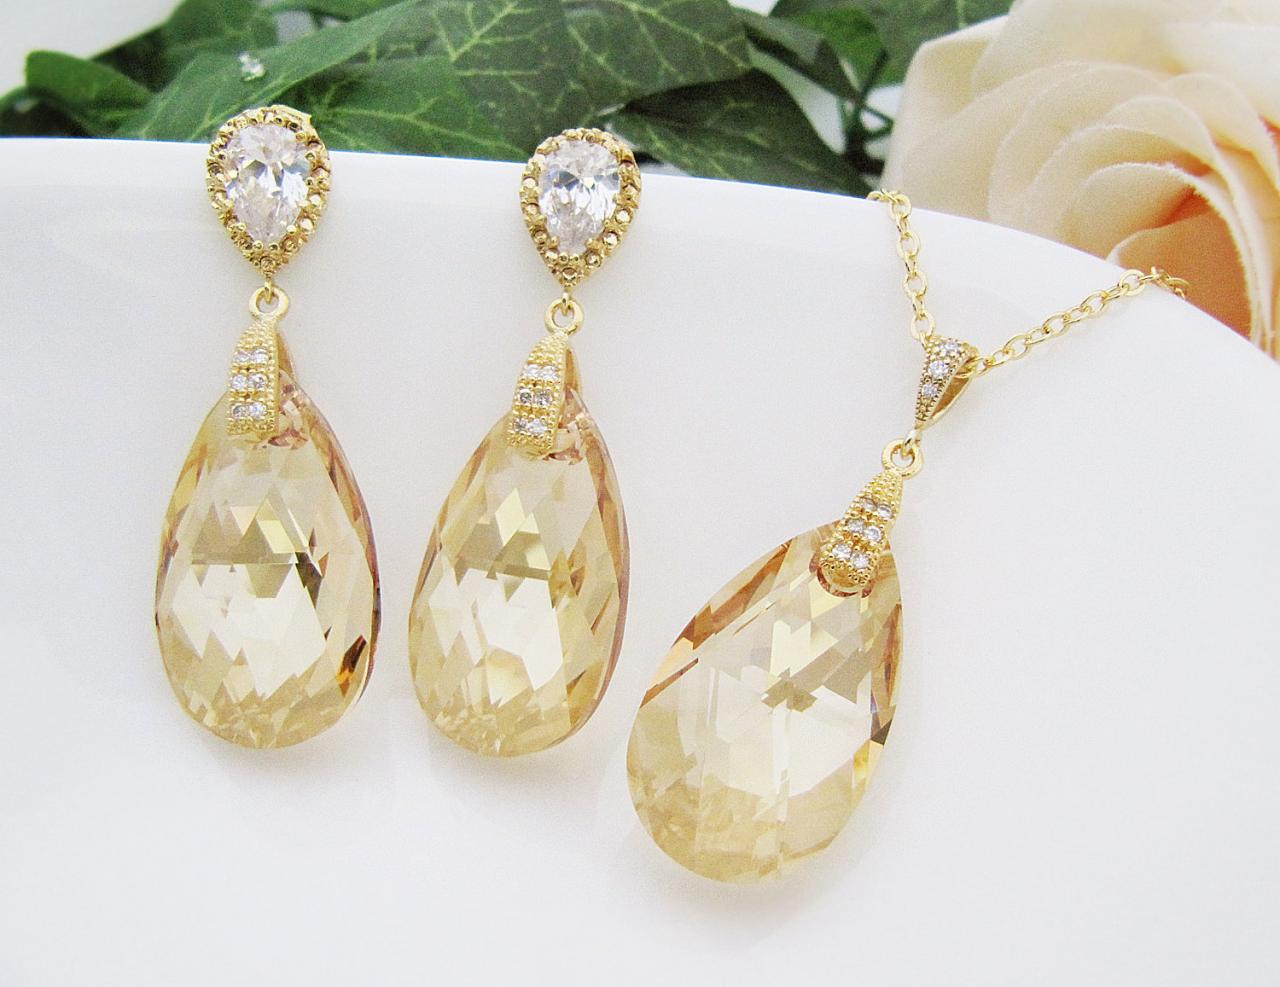 Bridal Necklace Bridal Earrings Matte Rodium Plated Cubic Zirconia Bail With (huge) Golden Shadow Swarovski Crystal Drops Bridal Jewelry Se